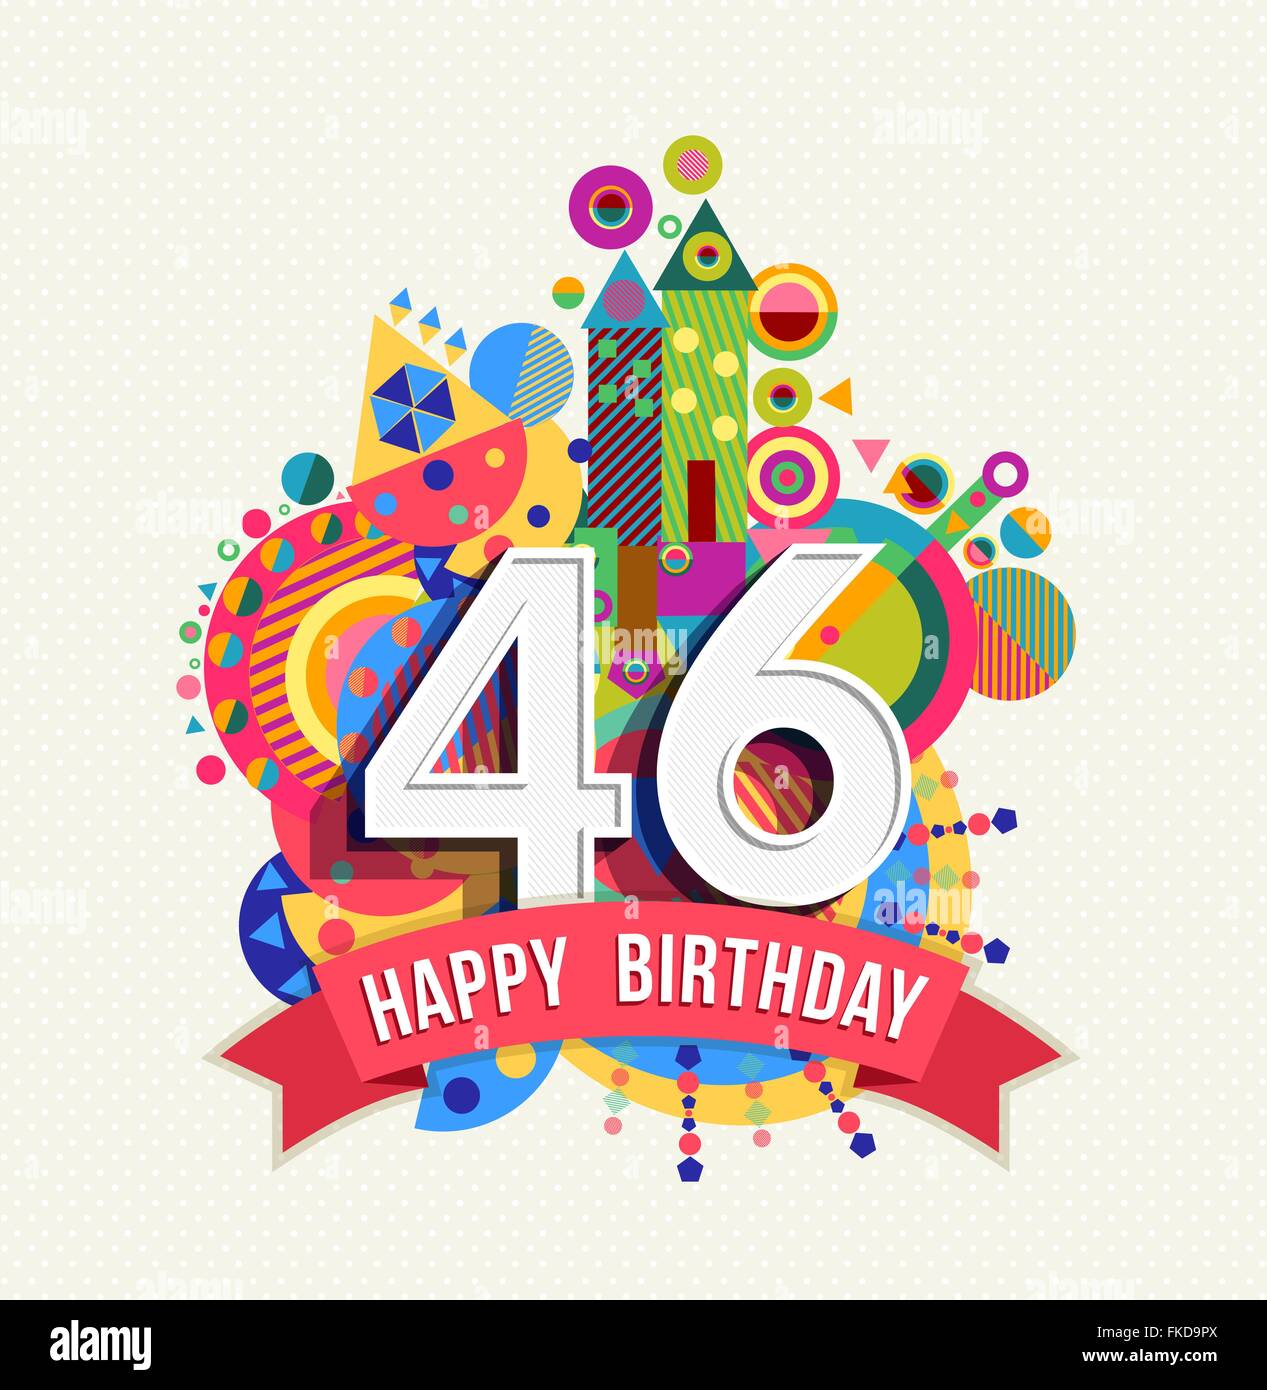 Happy Birthday forty six 46 year, fun celebration anniversary greeting card with number, text label and colorful geometry design Stock Vector